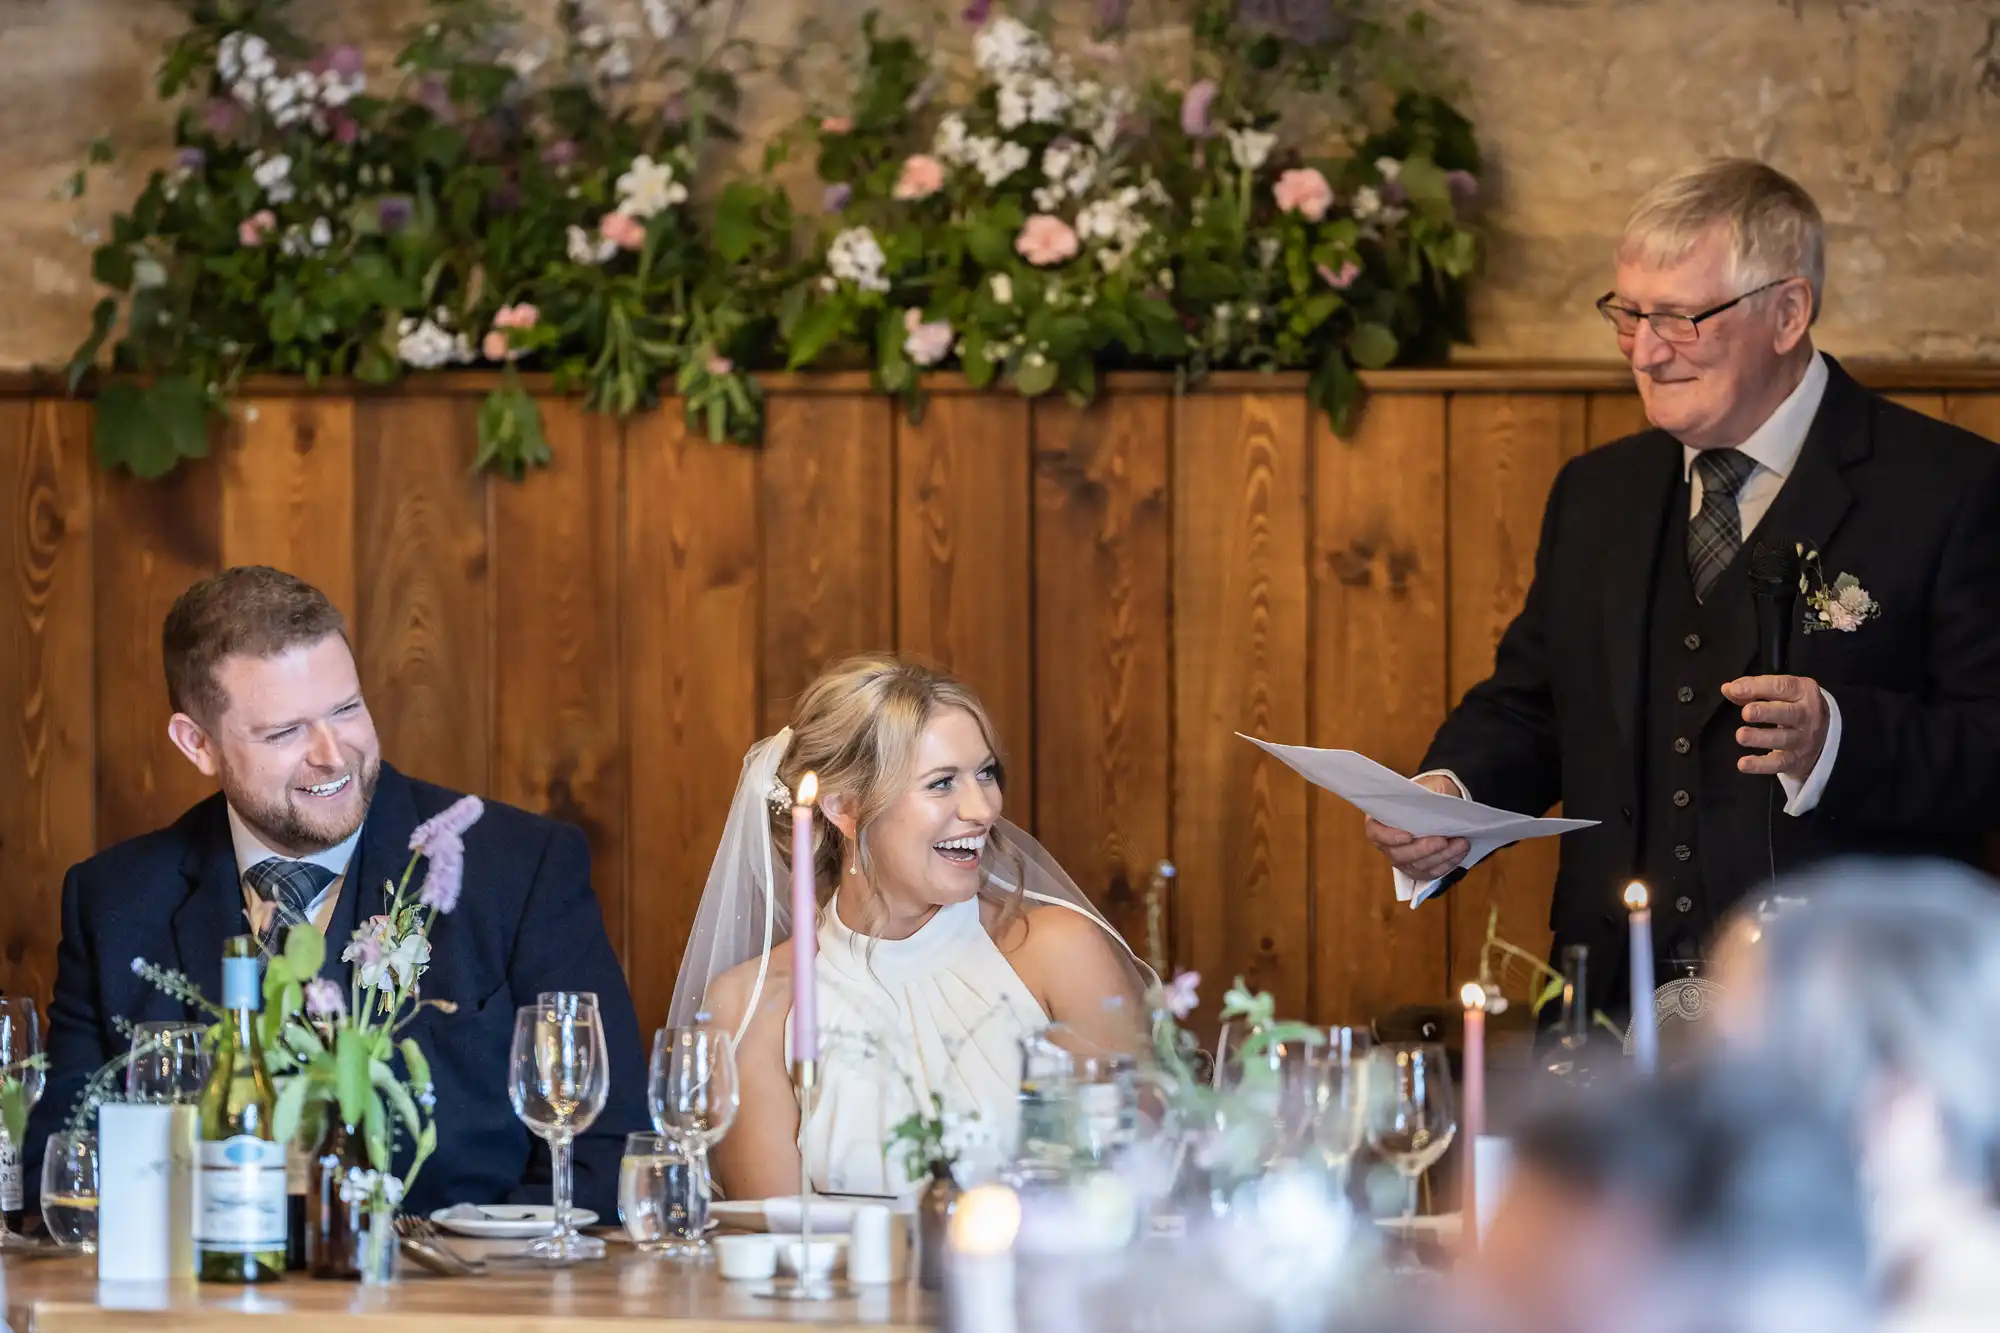 A bride and groom laugh at a speech given by an older man at their wedding reception, surrounded by floral decorations and guests.